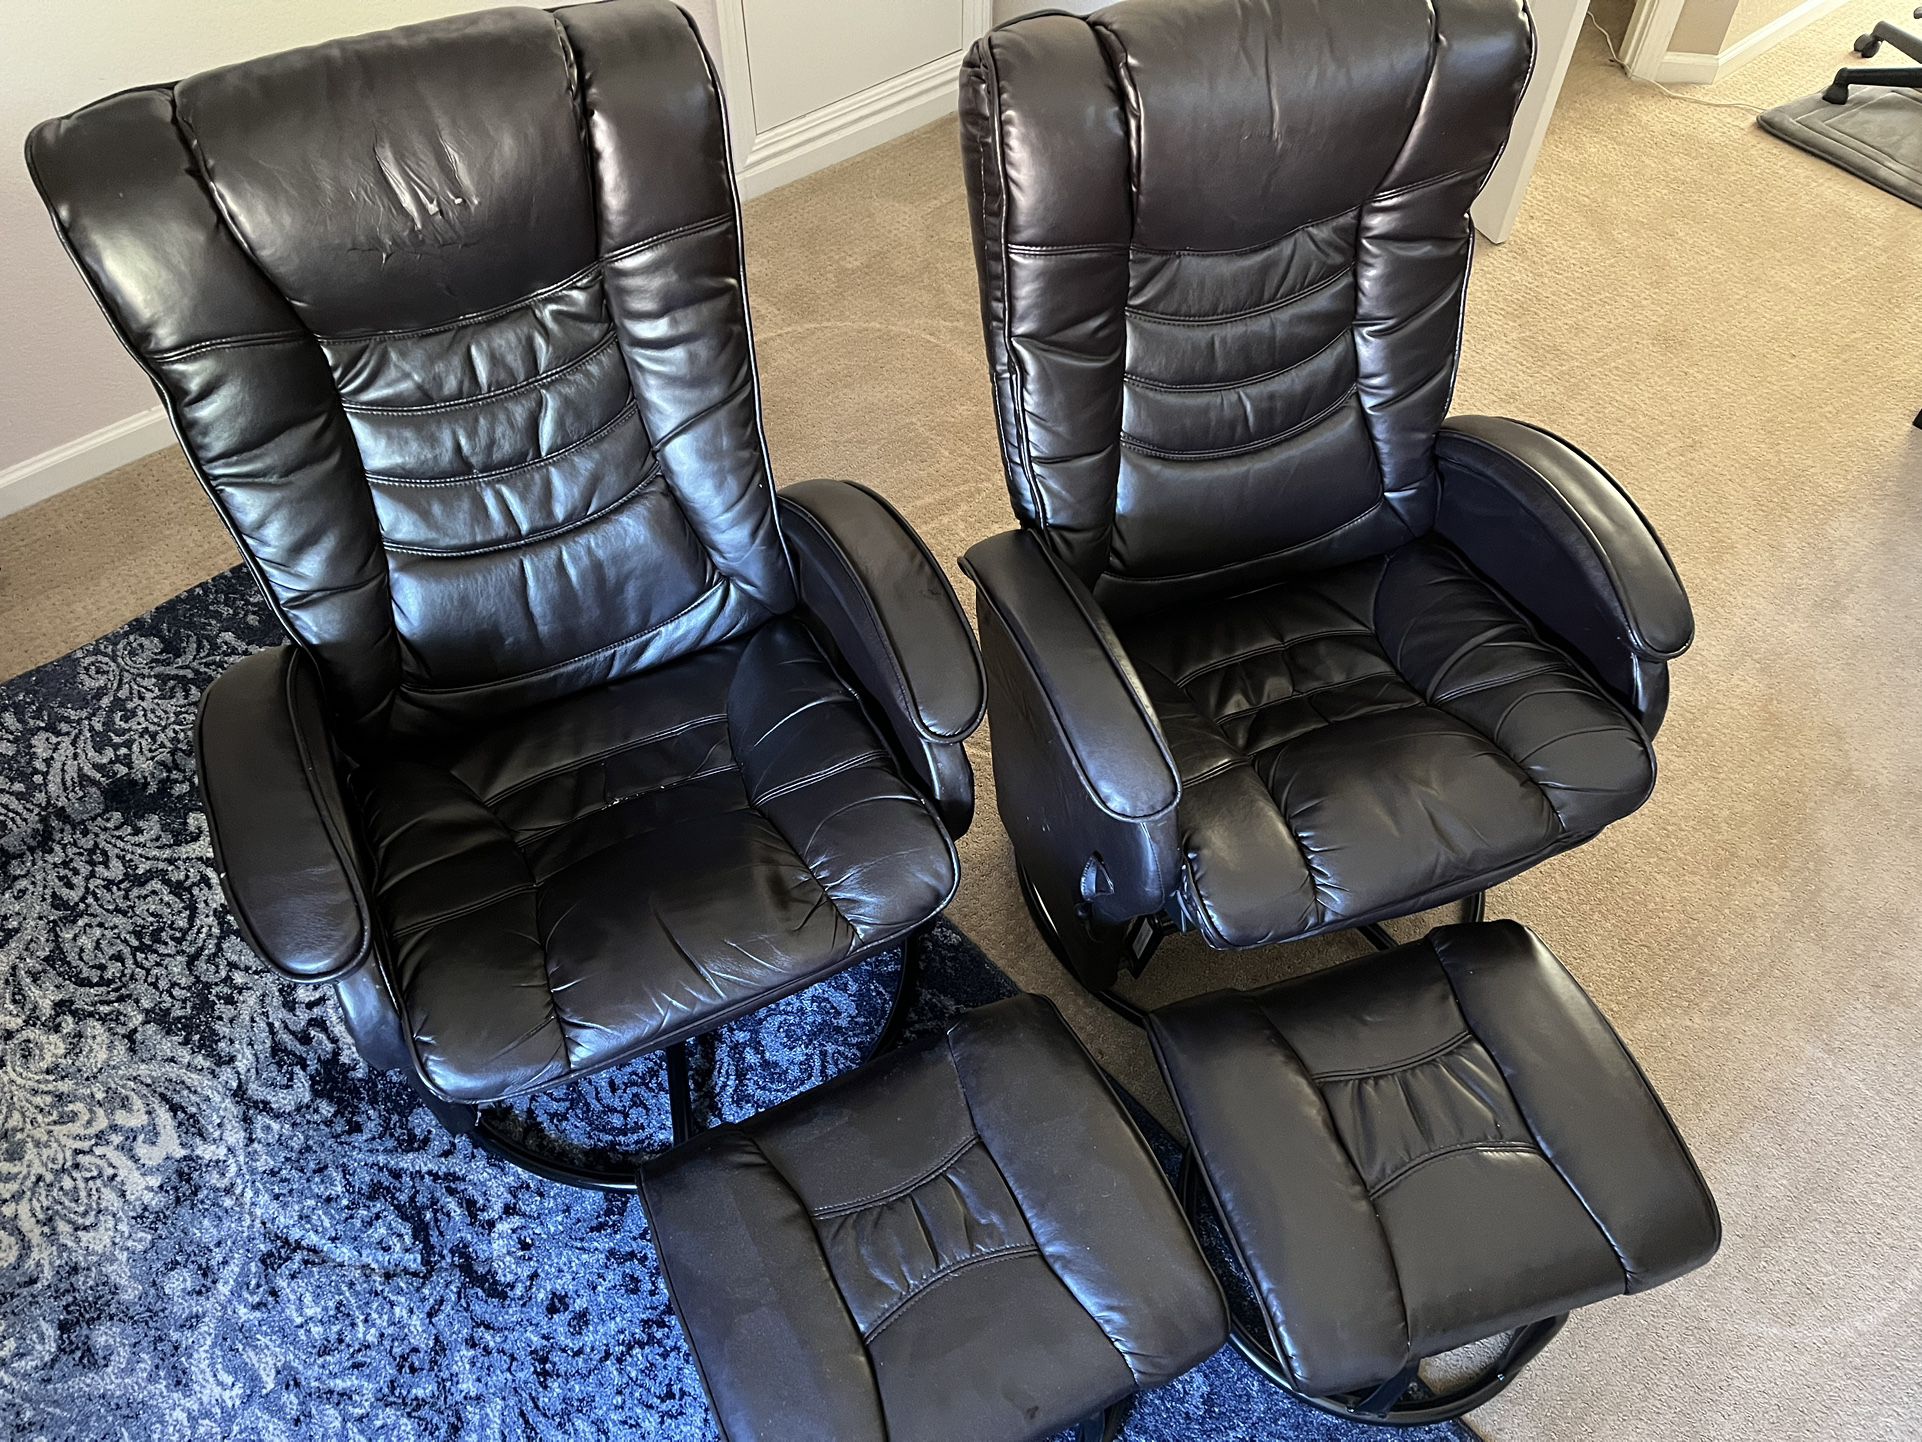 2 Swivel Recliners With Ottomans